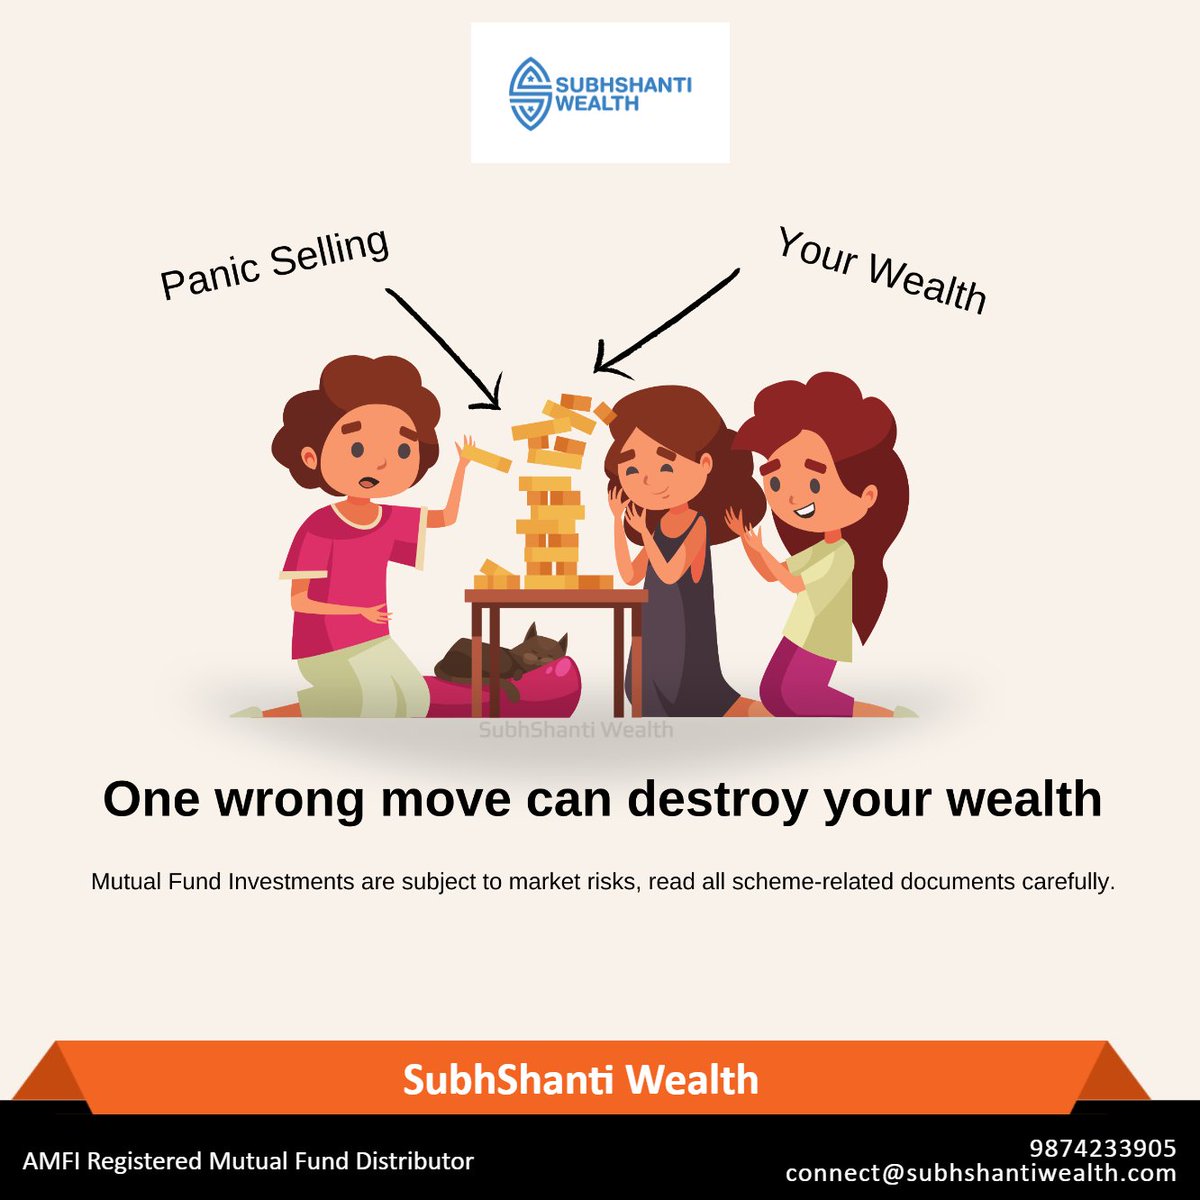 Protect your wealth: Don't let panic drive your investment decisions. One wrong move can destroy your wealth. Stay focused and invest wisely with SubhShanti Wealth.
#subhshantiwealth #investmenttips #investingforthefuture #Investments #investmentdecisions #investmentadvice